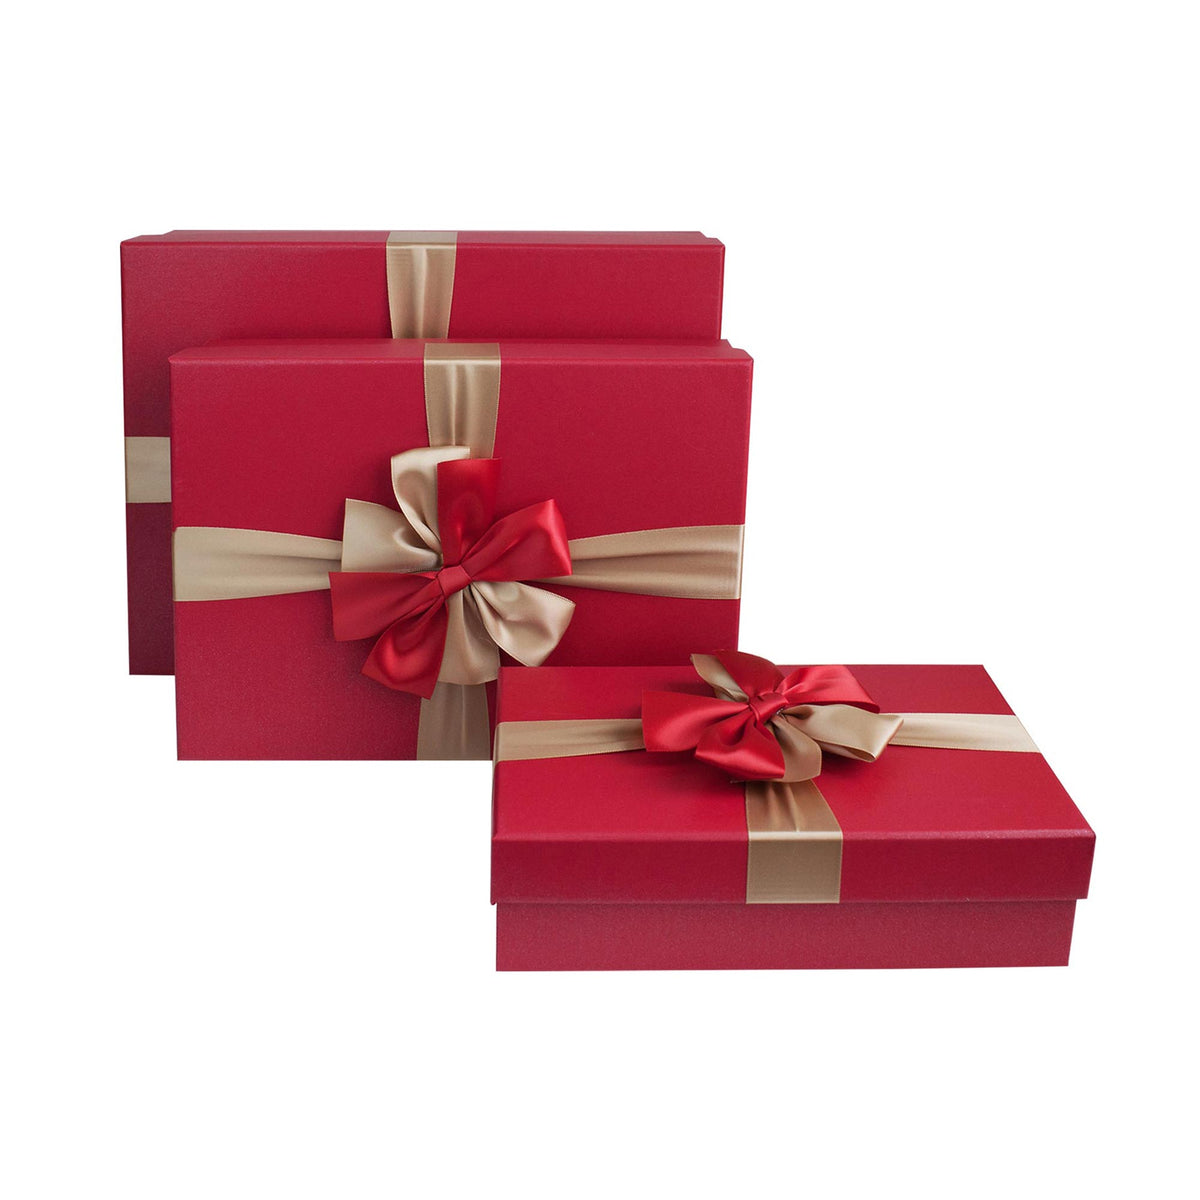 Set of 3 Red Gift Boxes with Cream Satin Ribbon